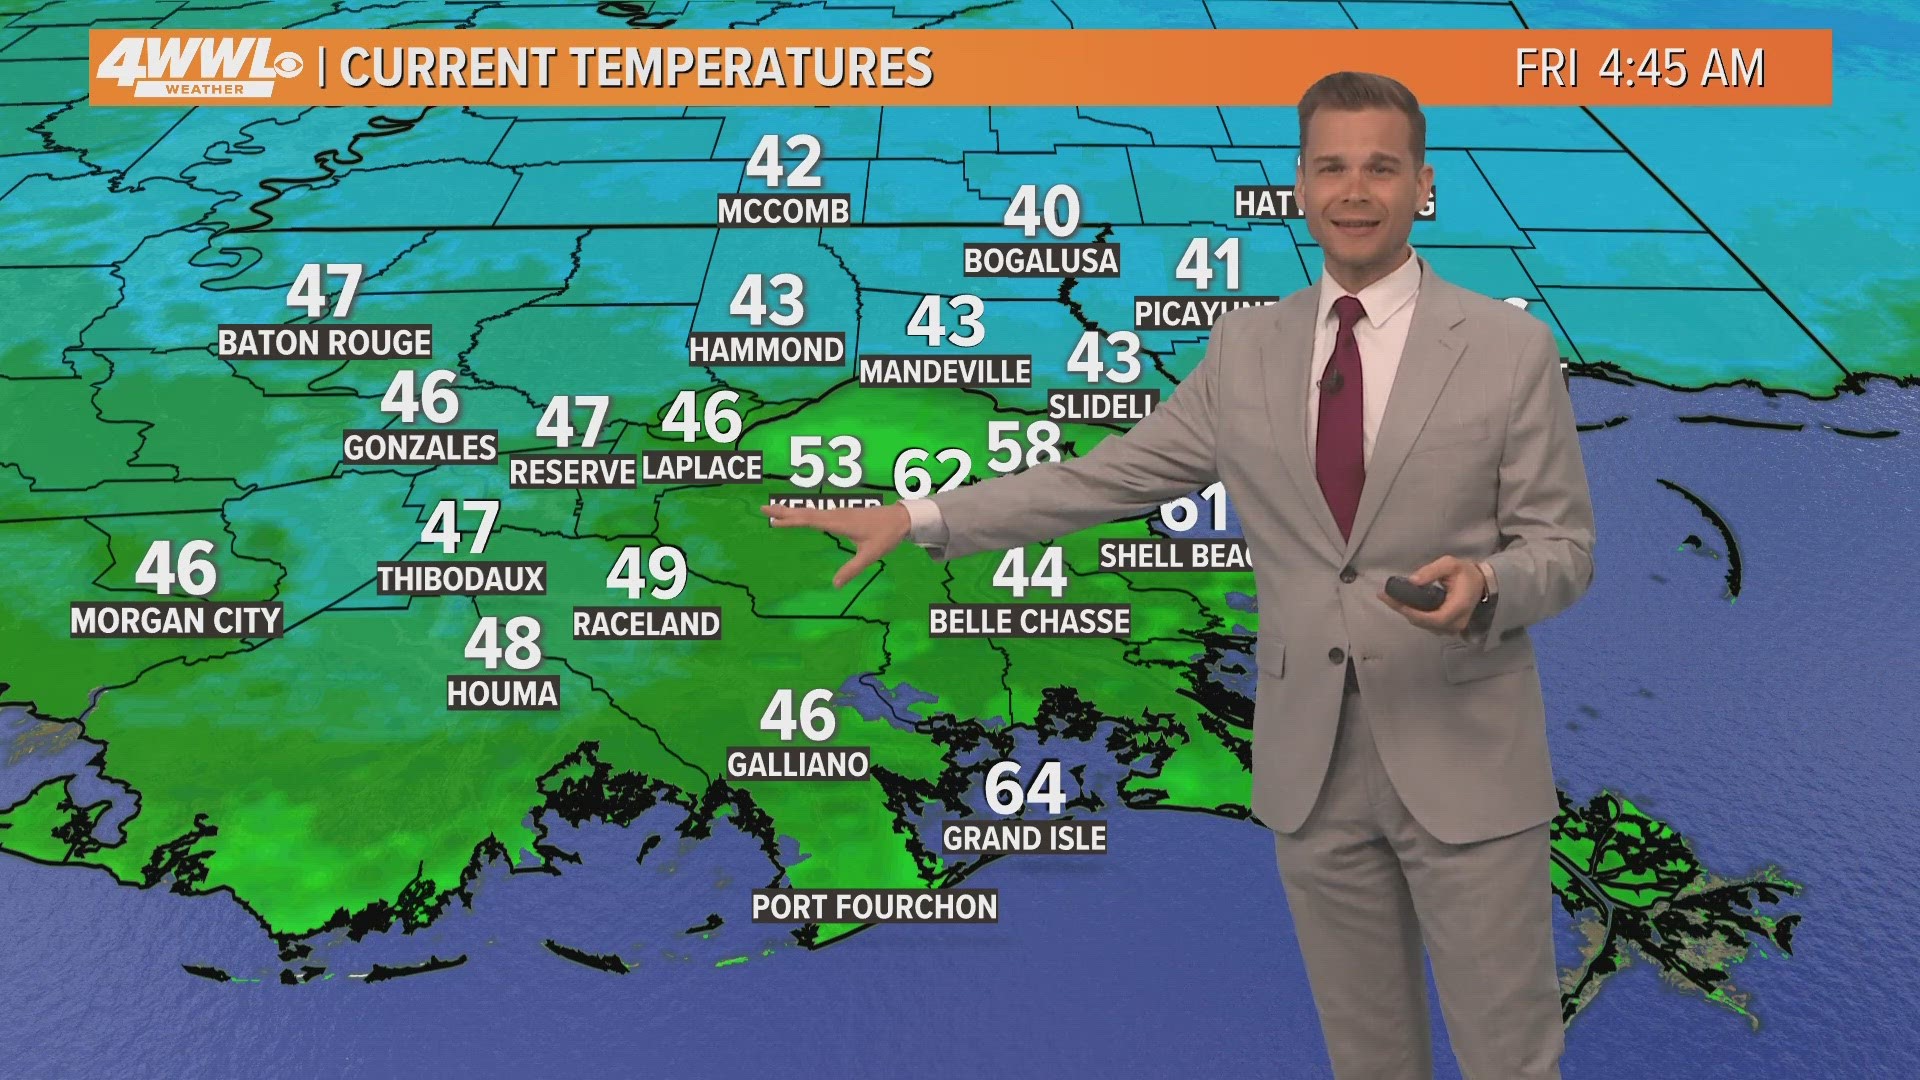 WWL Meteorologist Payton Malone gives a weather update ahead of Easter Sunday.